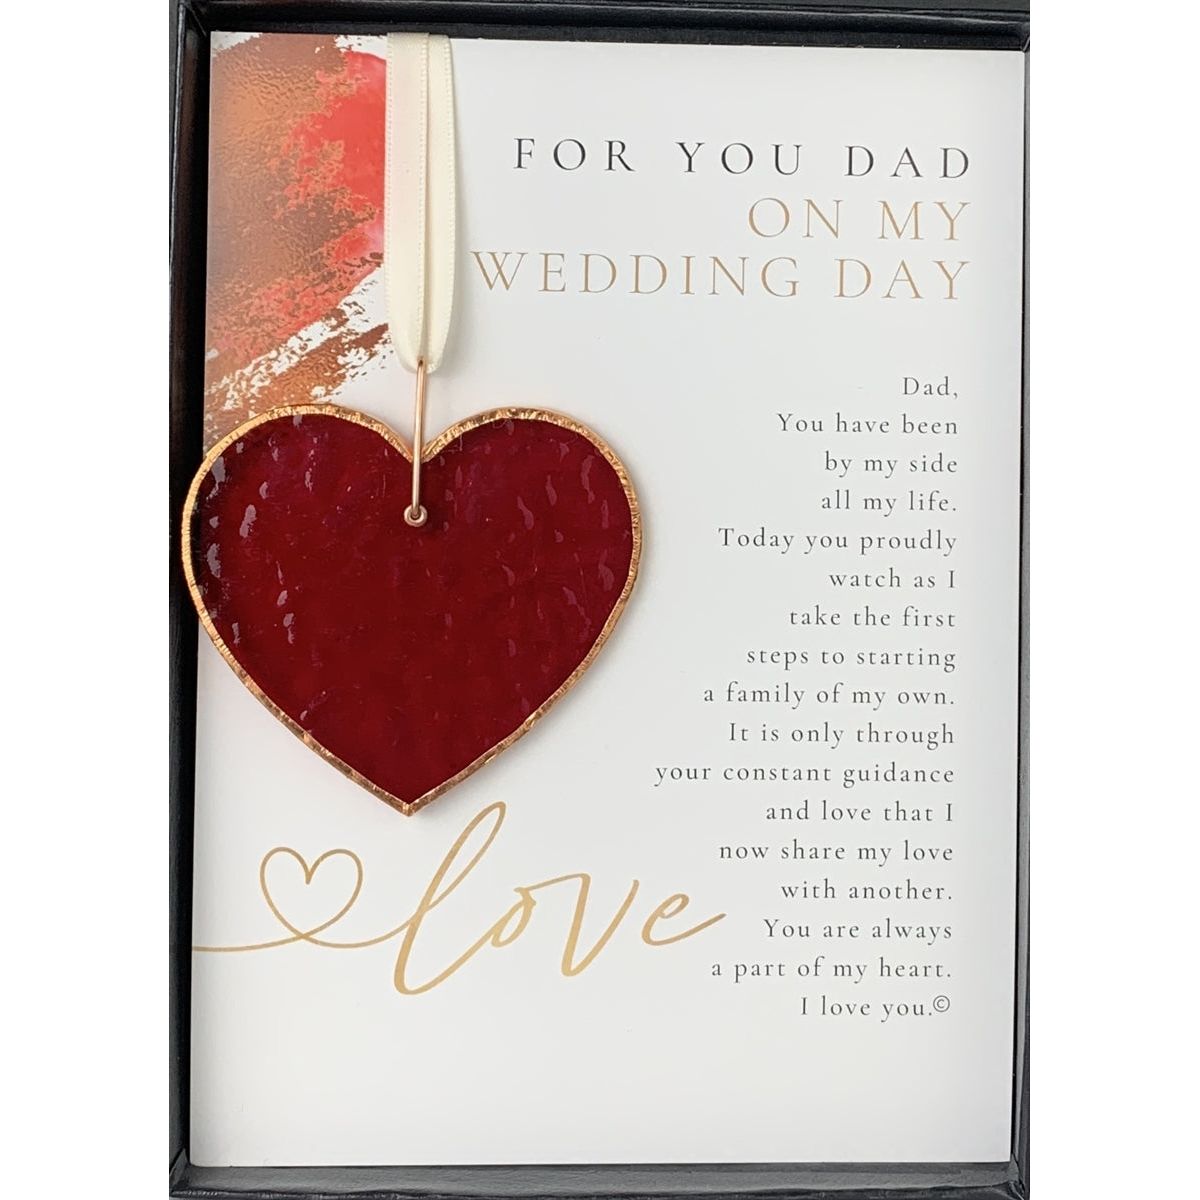 Stained glass red heart edged with copper and packaged with &quot;For You Dad on My Wedding Day&quot; sentiment in black box with clear lid.